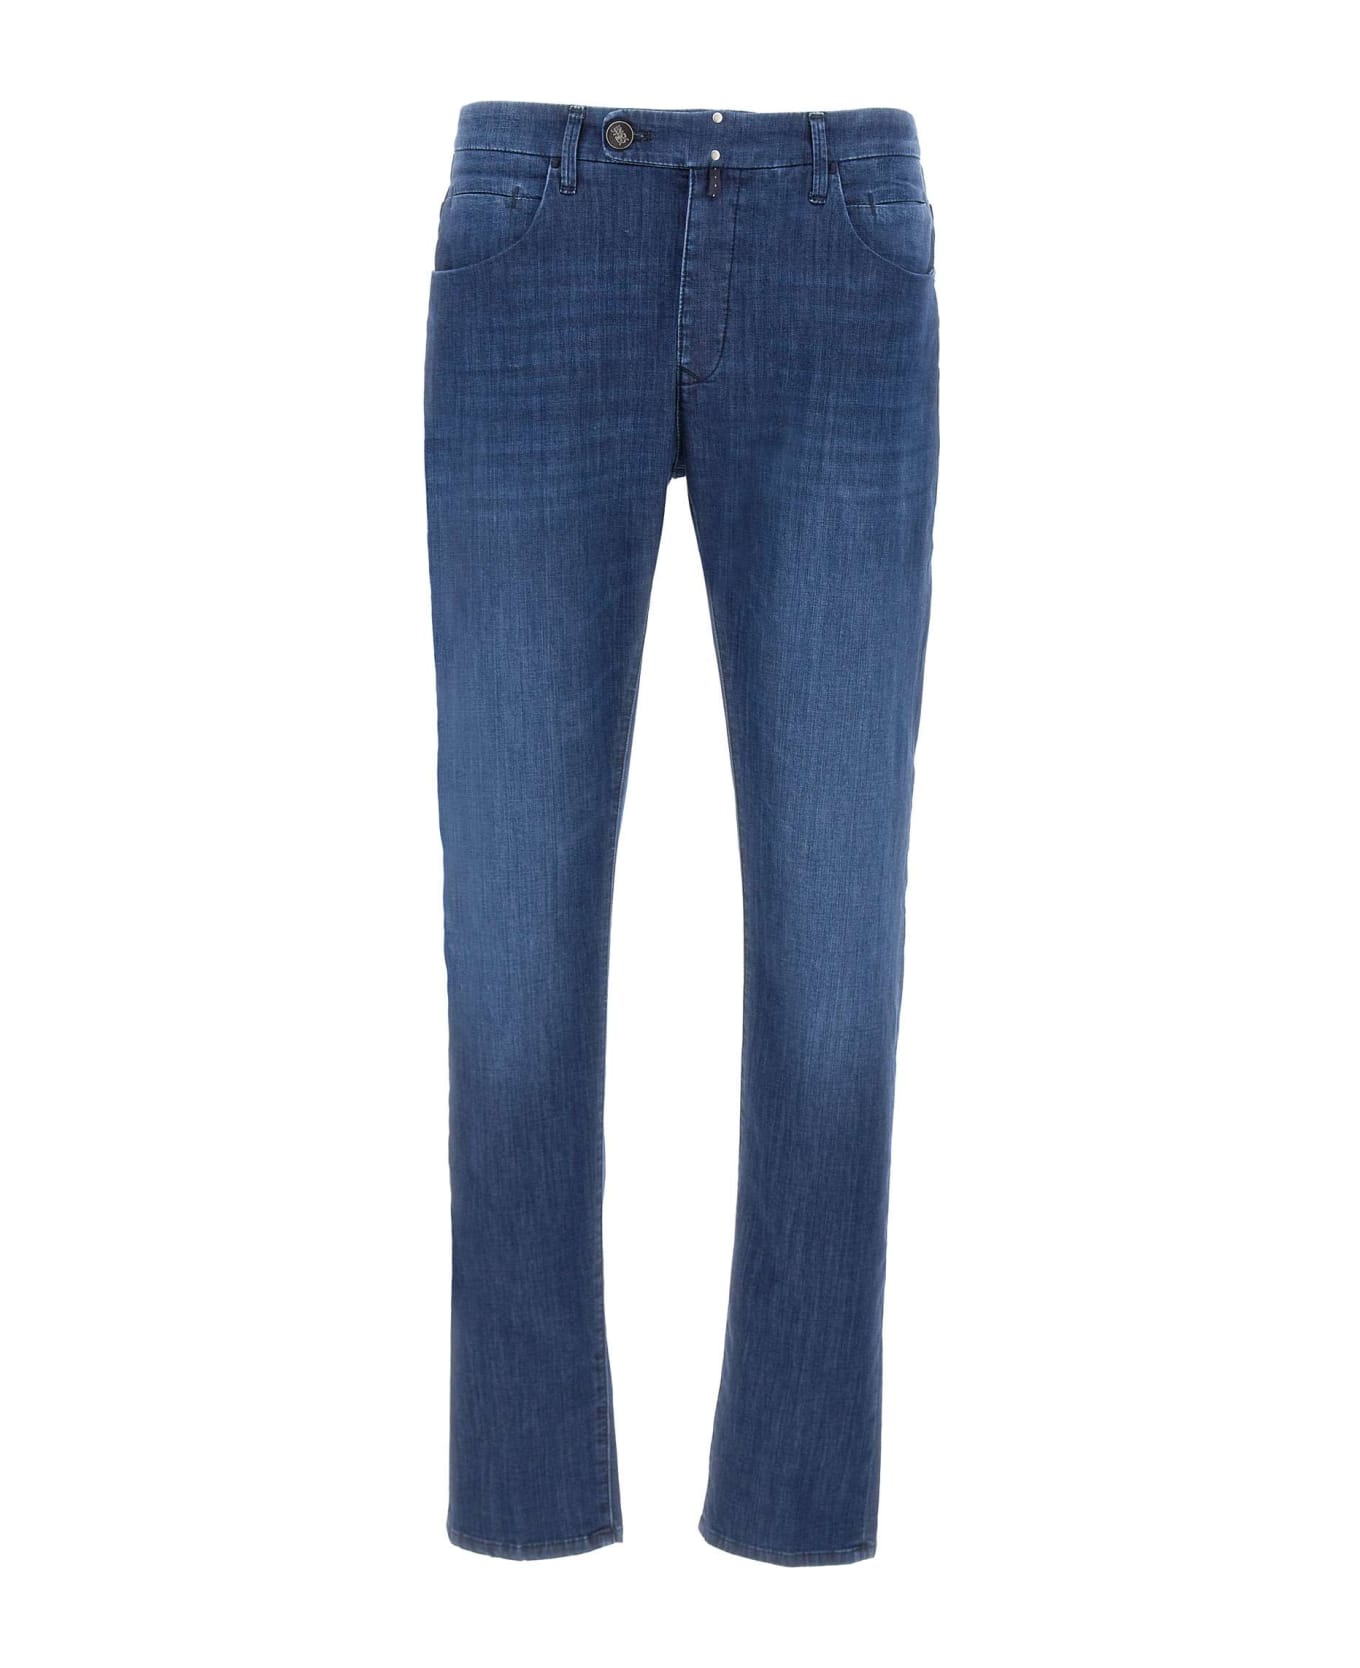 Incotex "blue Division Tailor Made" Jeans - BLUE